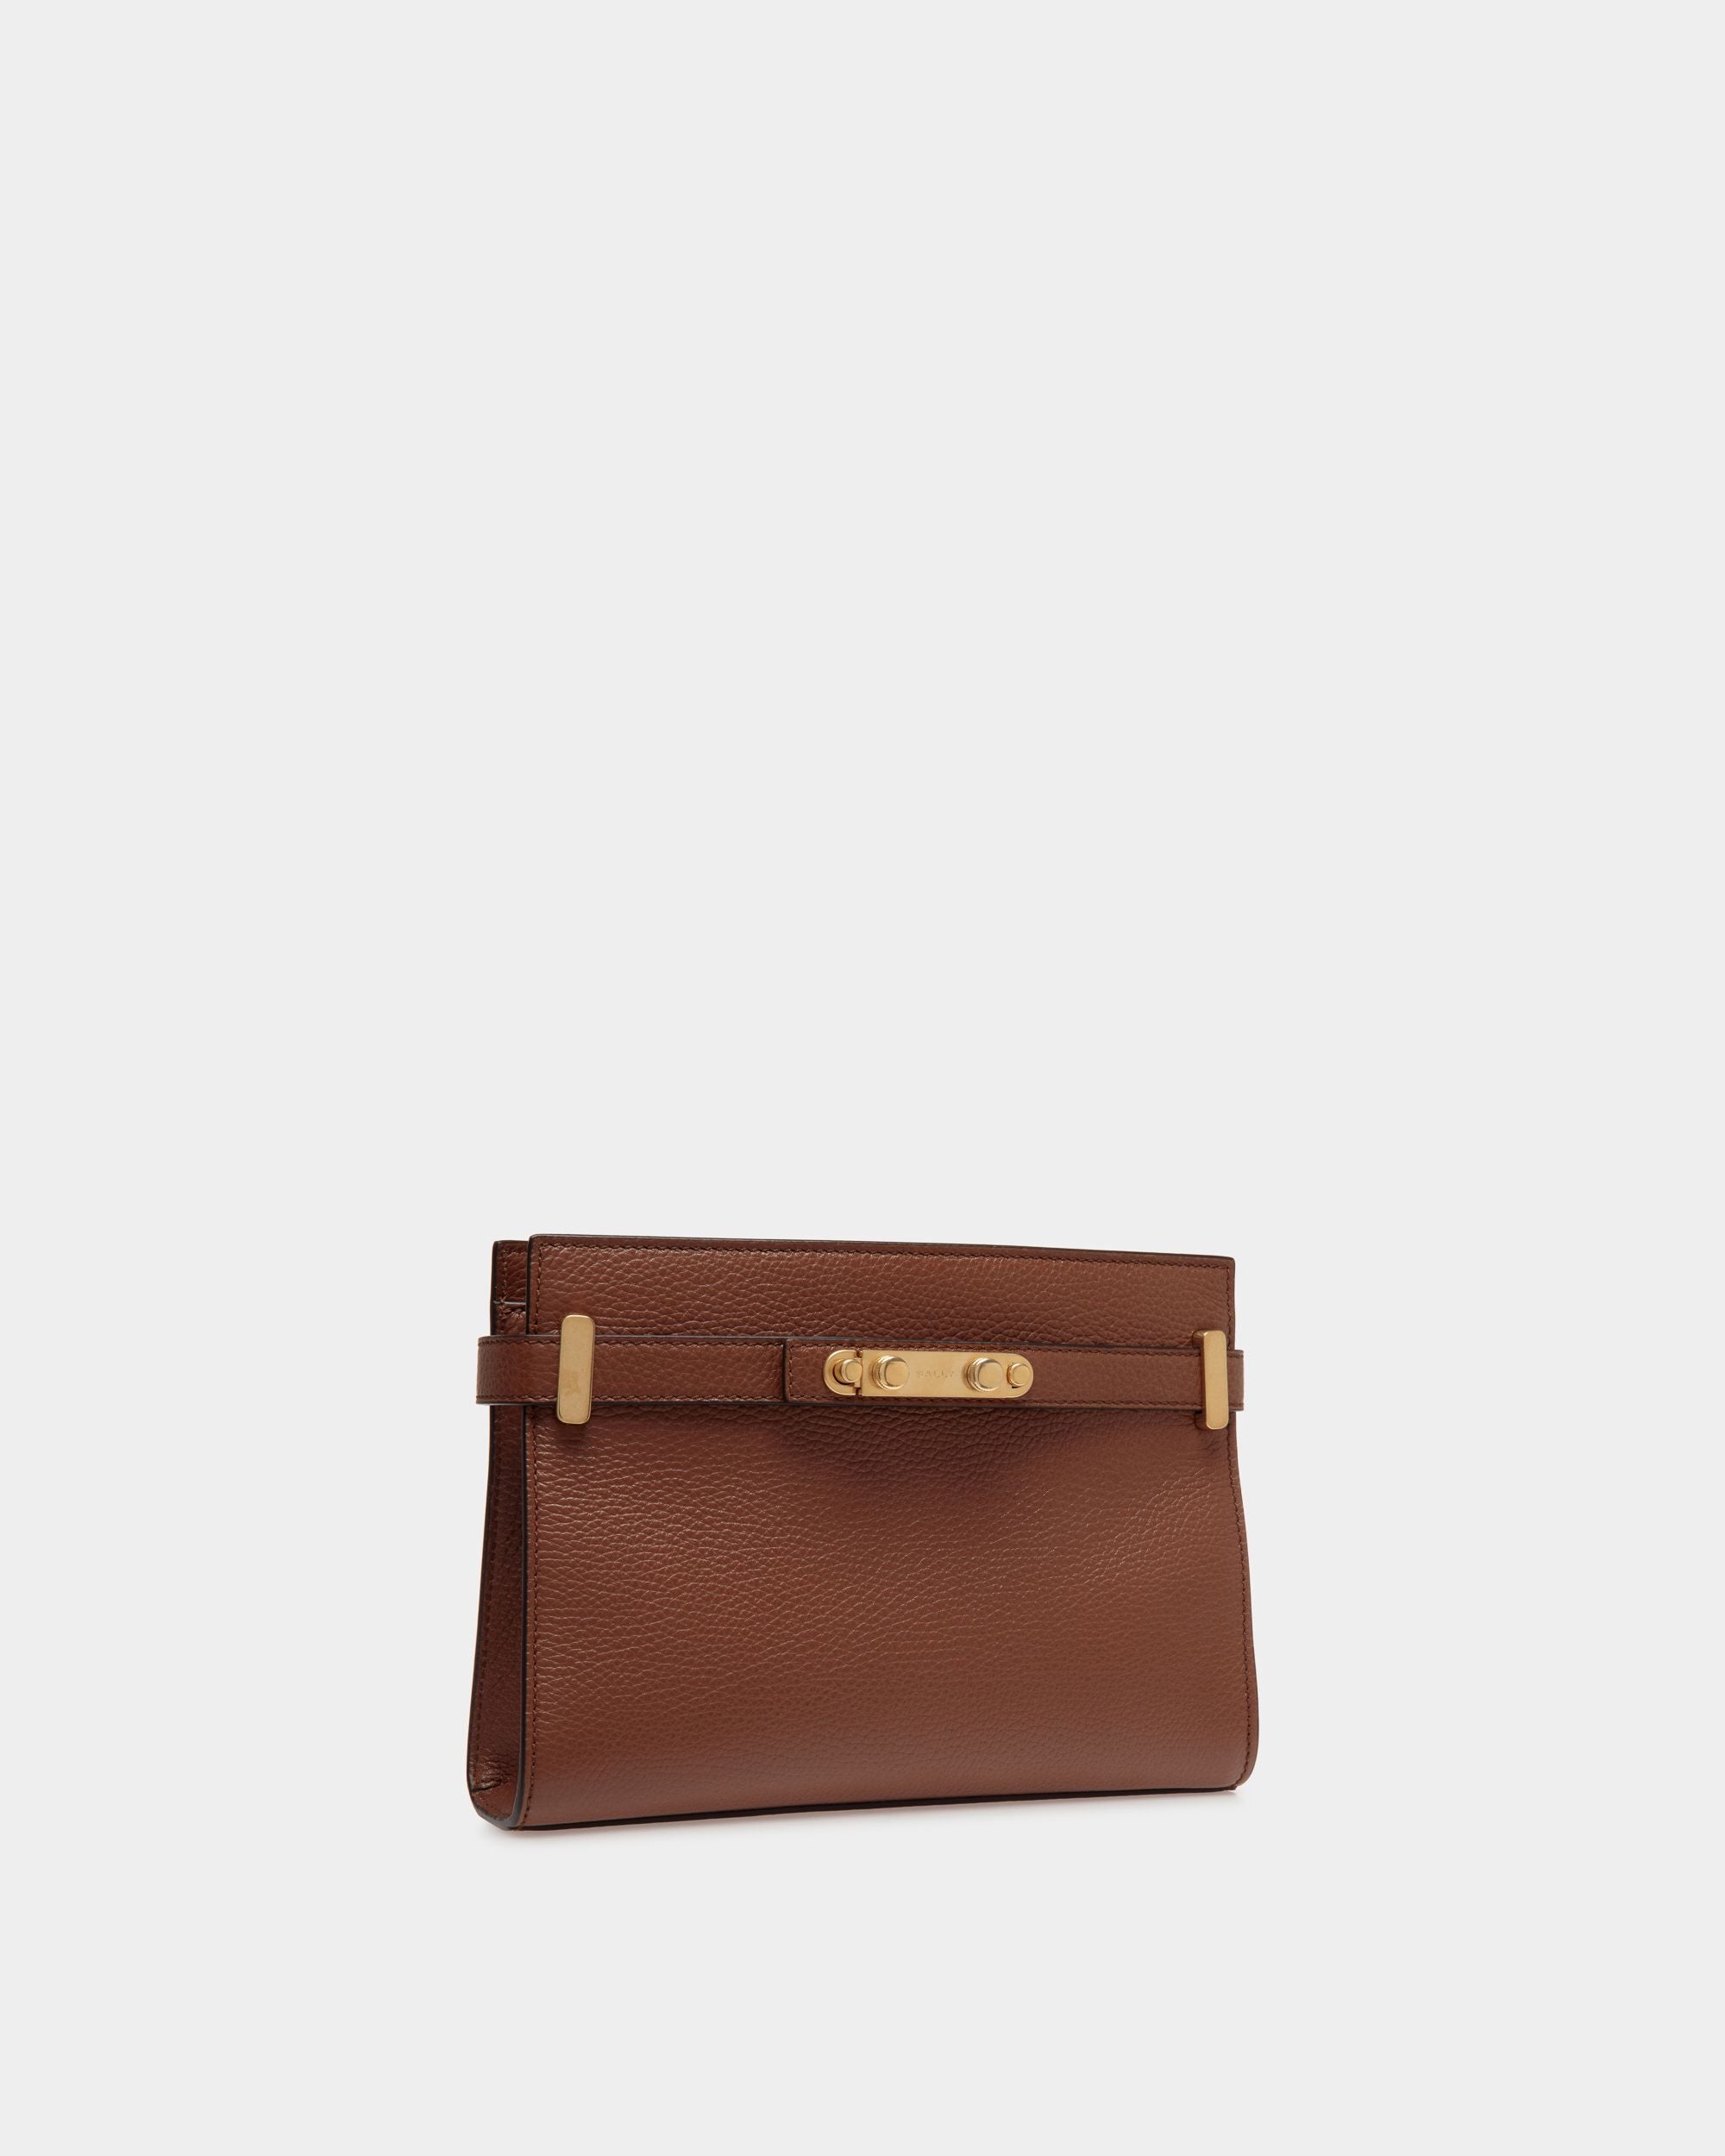 Carriage | Women's Crossbody Bag in Brown Grained Leather | Bally | Still Life 3/4 Front